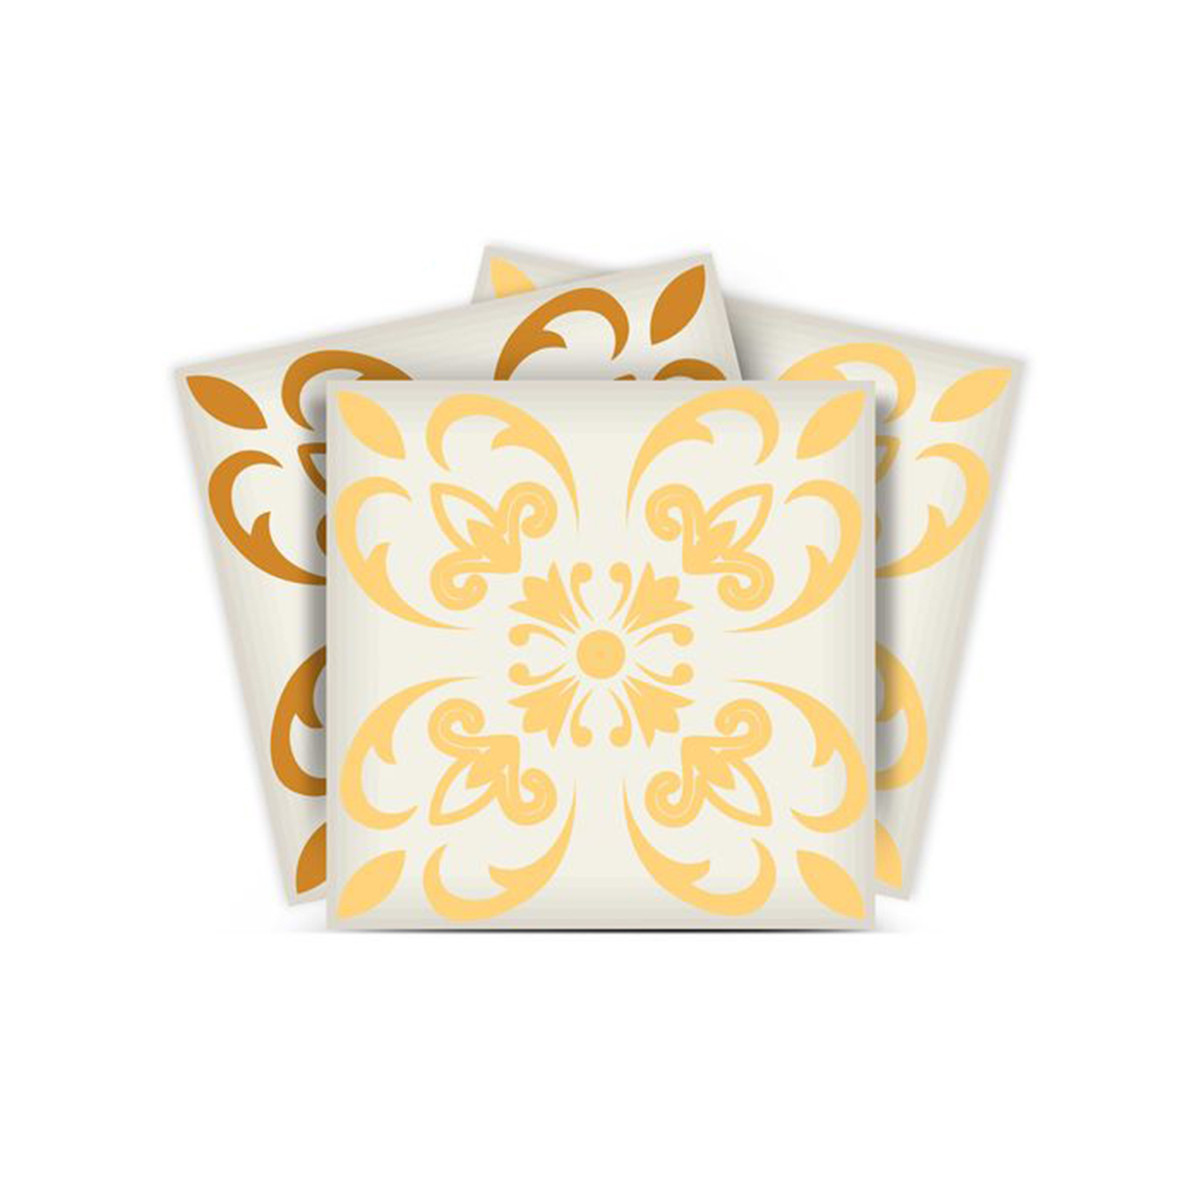 6" X 6" Golden Yellow Retro Peel And Stick Removable Tiles-399842-1